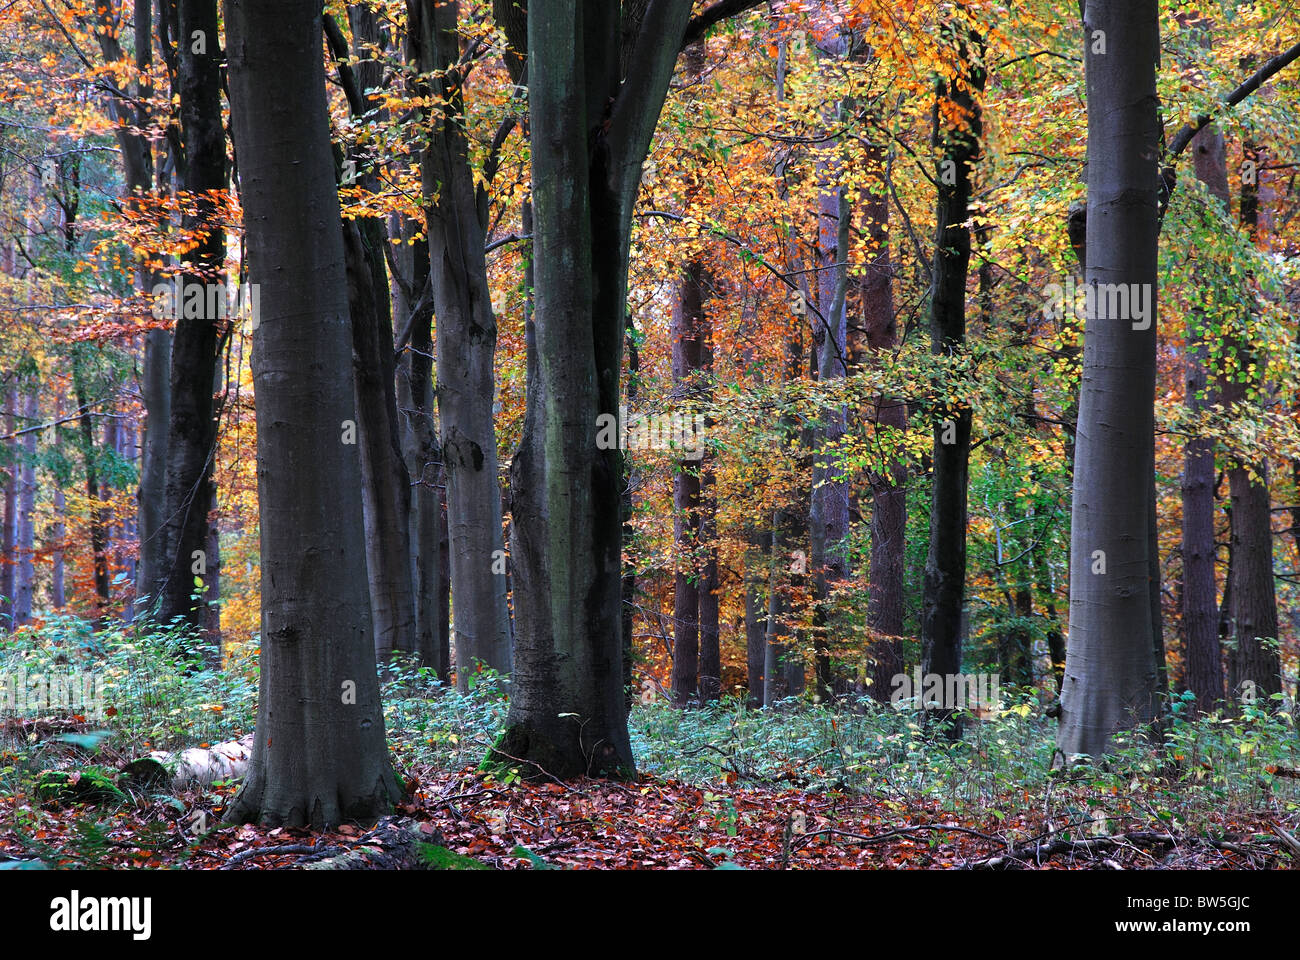 Beech trees in Savernake Forest, autumn. Wiltshire, UK November 2010 Stock Photo